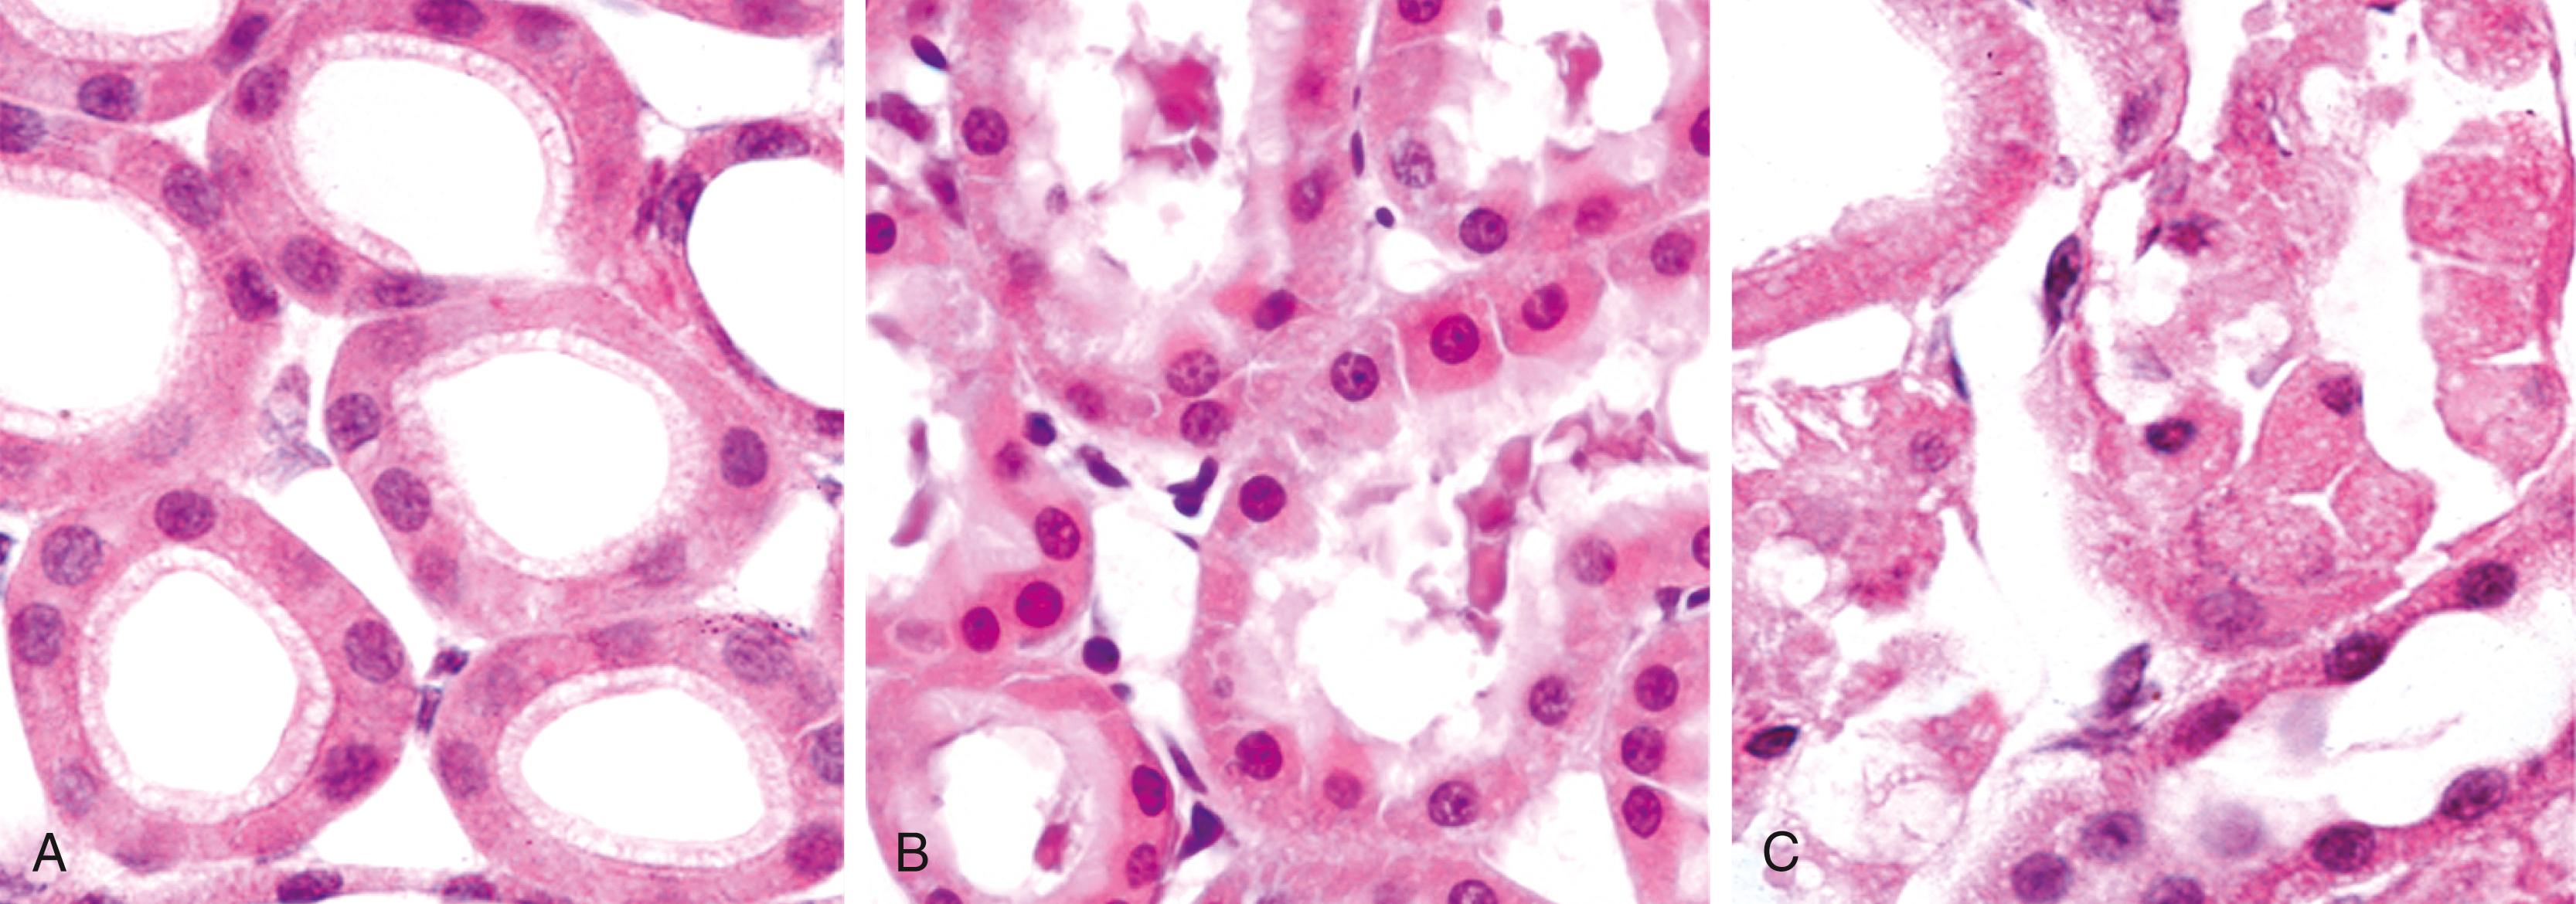 FIG. 1.4, Morphologic changes in reversible cell injury and necrosis. (A) Normal kidney tubules with viable epithelial cells. (B) Early (reversible) ischemic injury showing surface blebs, increased eosinophilia of cytoplasm, and swelling of occasional cells. (C) Necrosis (irreversible injury) of epithelial cells, with loss of nuclei and fragmentation of cells and leakage of contents.